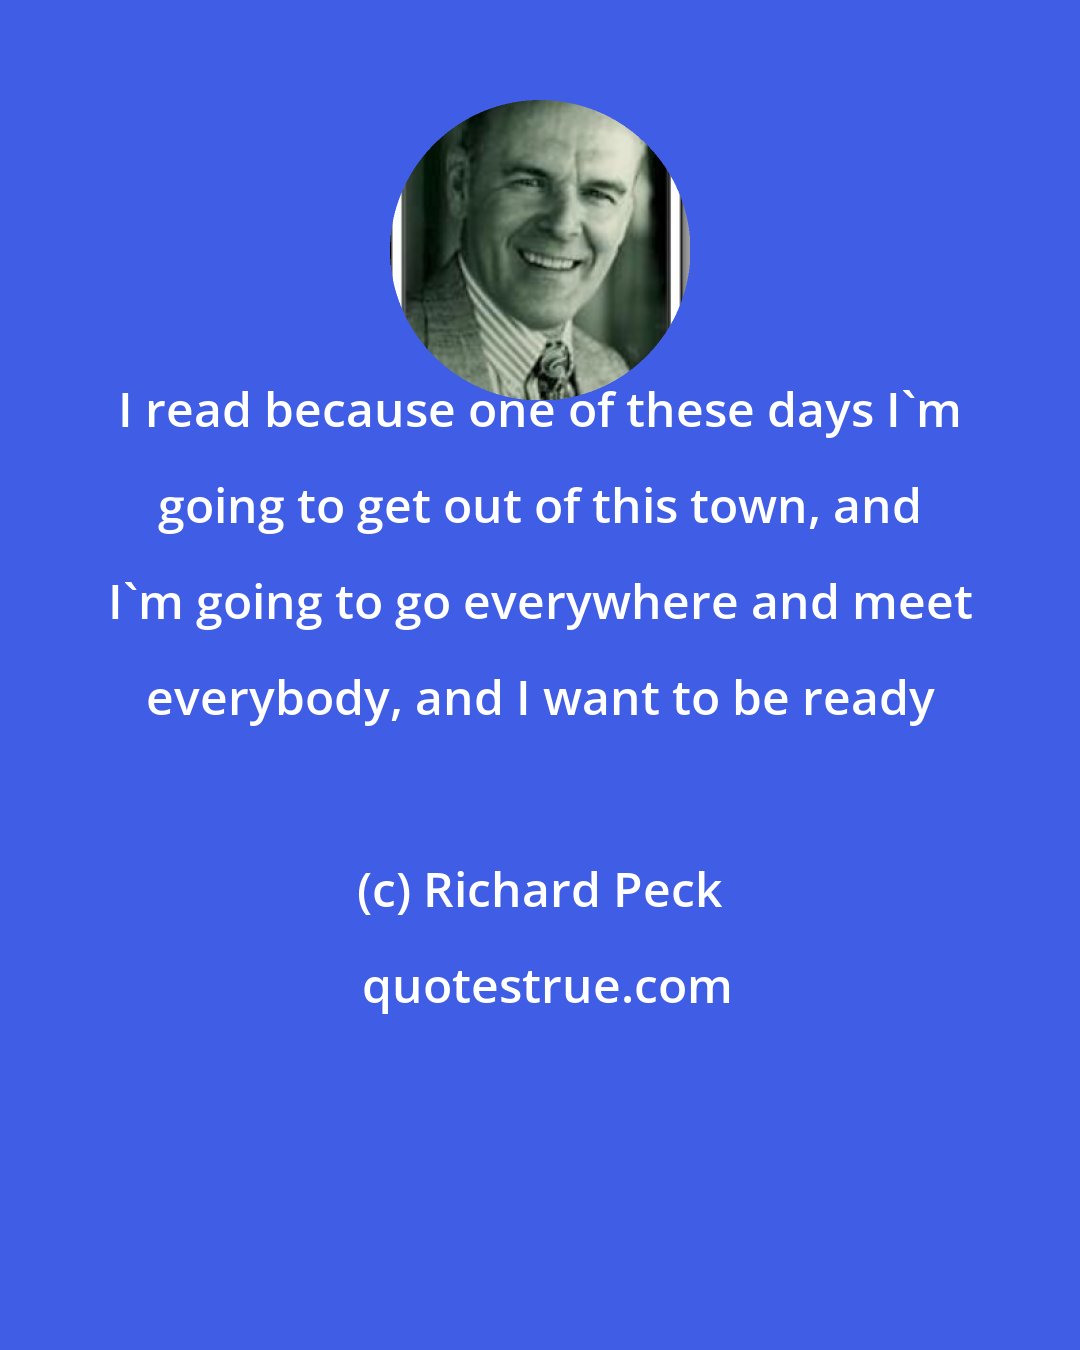 Richard Peck: I read because one of these days I'm going to get out of this town, and I'm going to go everywhere and meet everybody, and I want to be ready